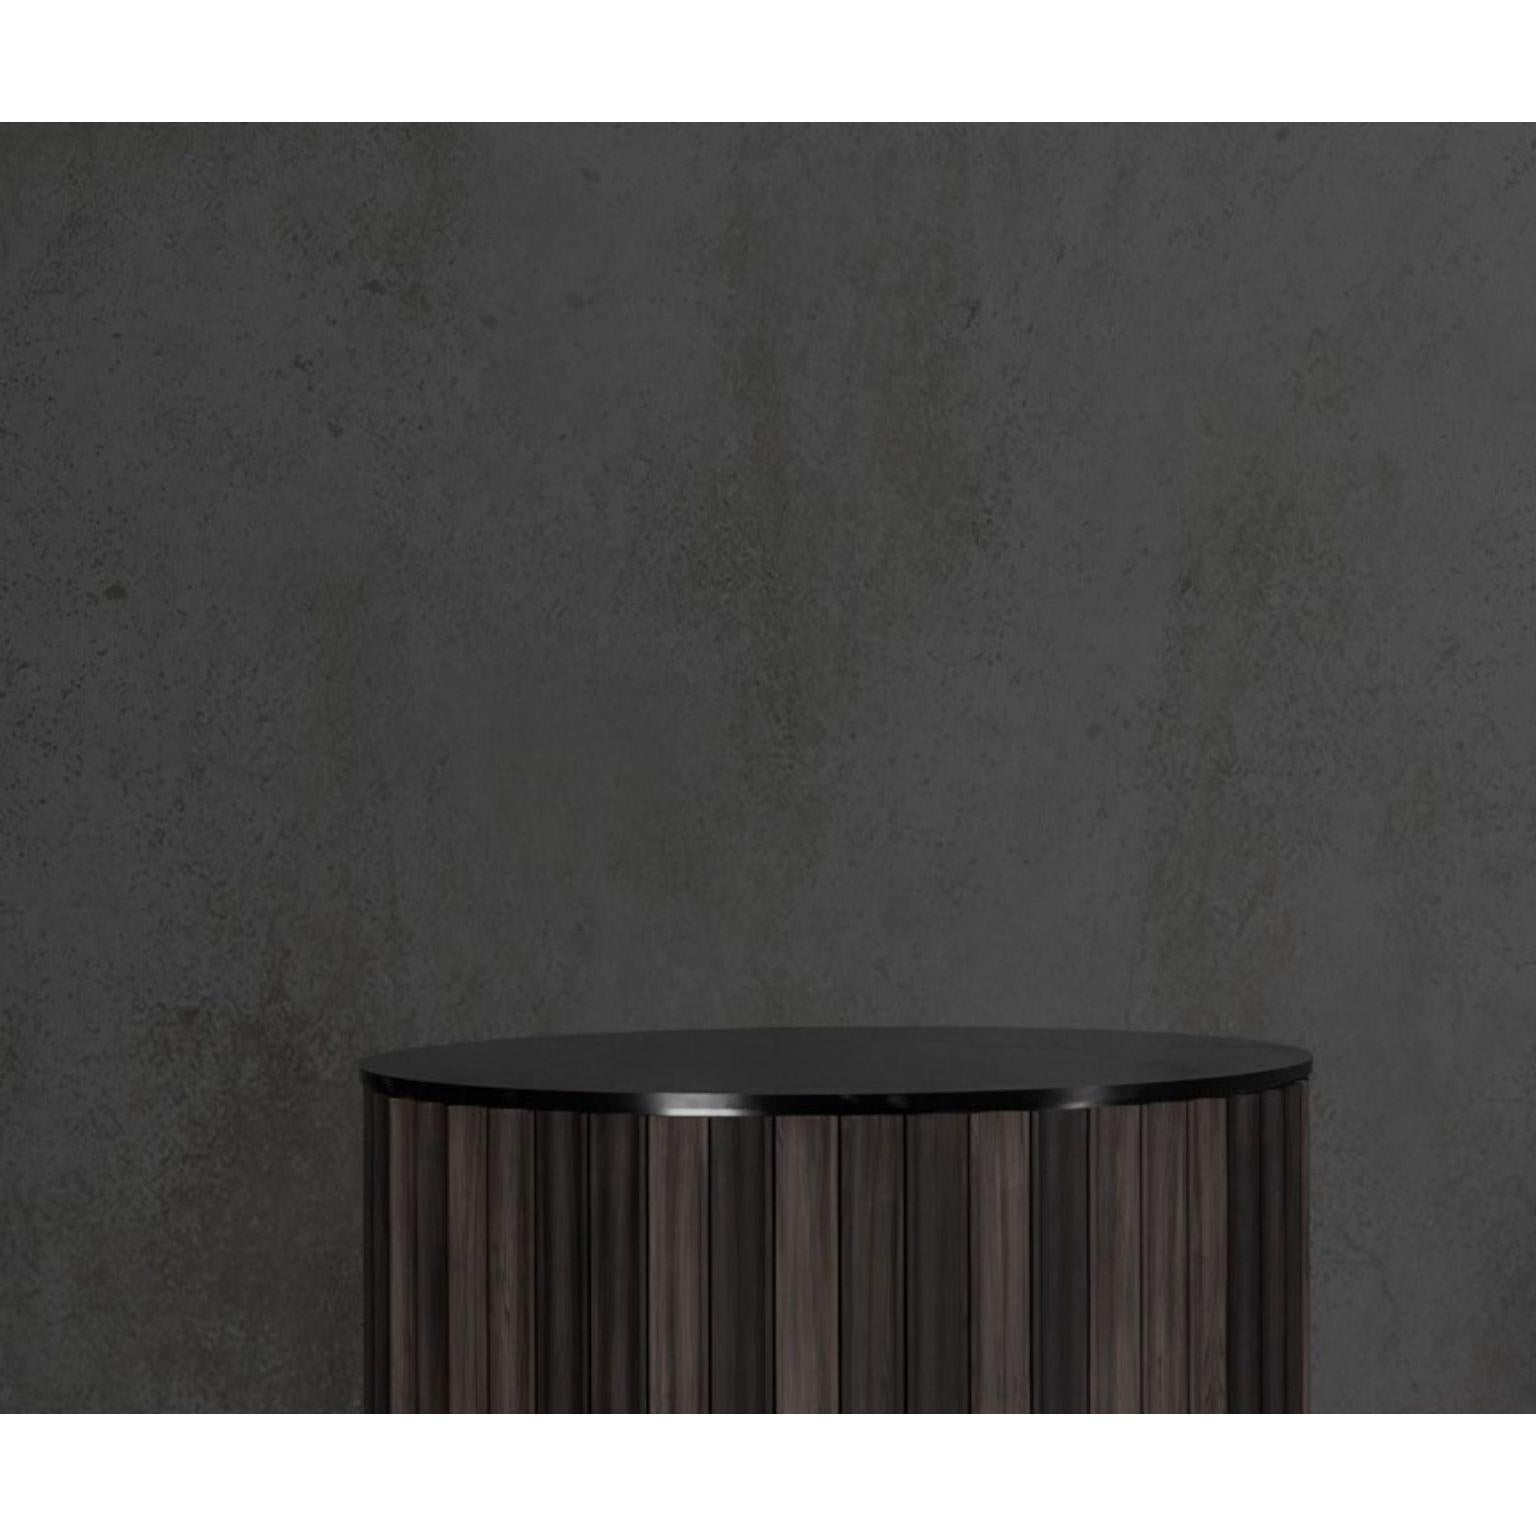 American Pilar End Table by Indo Made For Sale